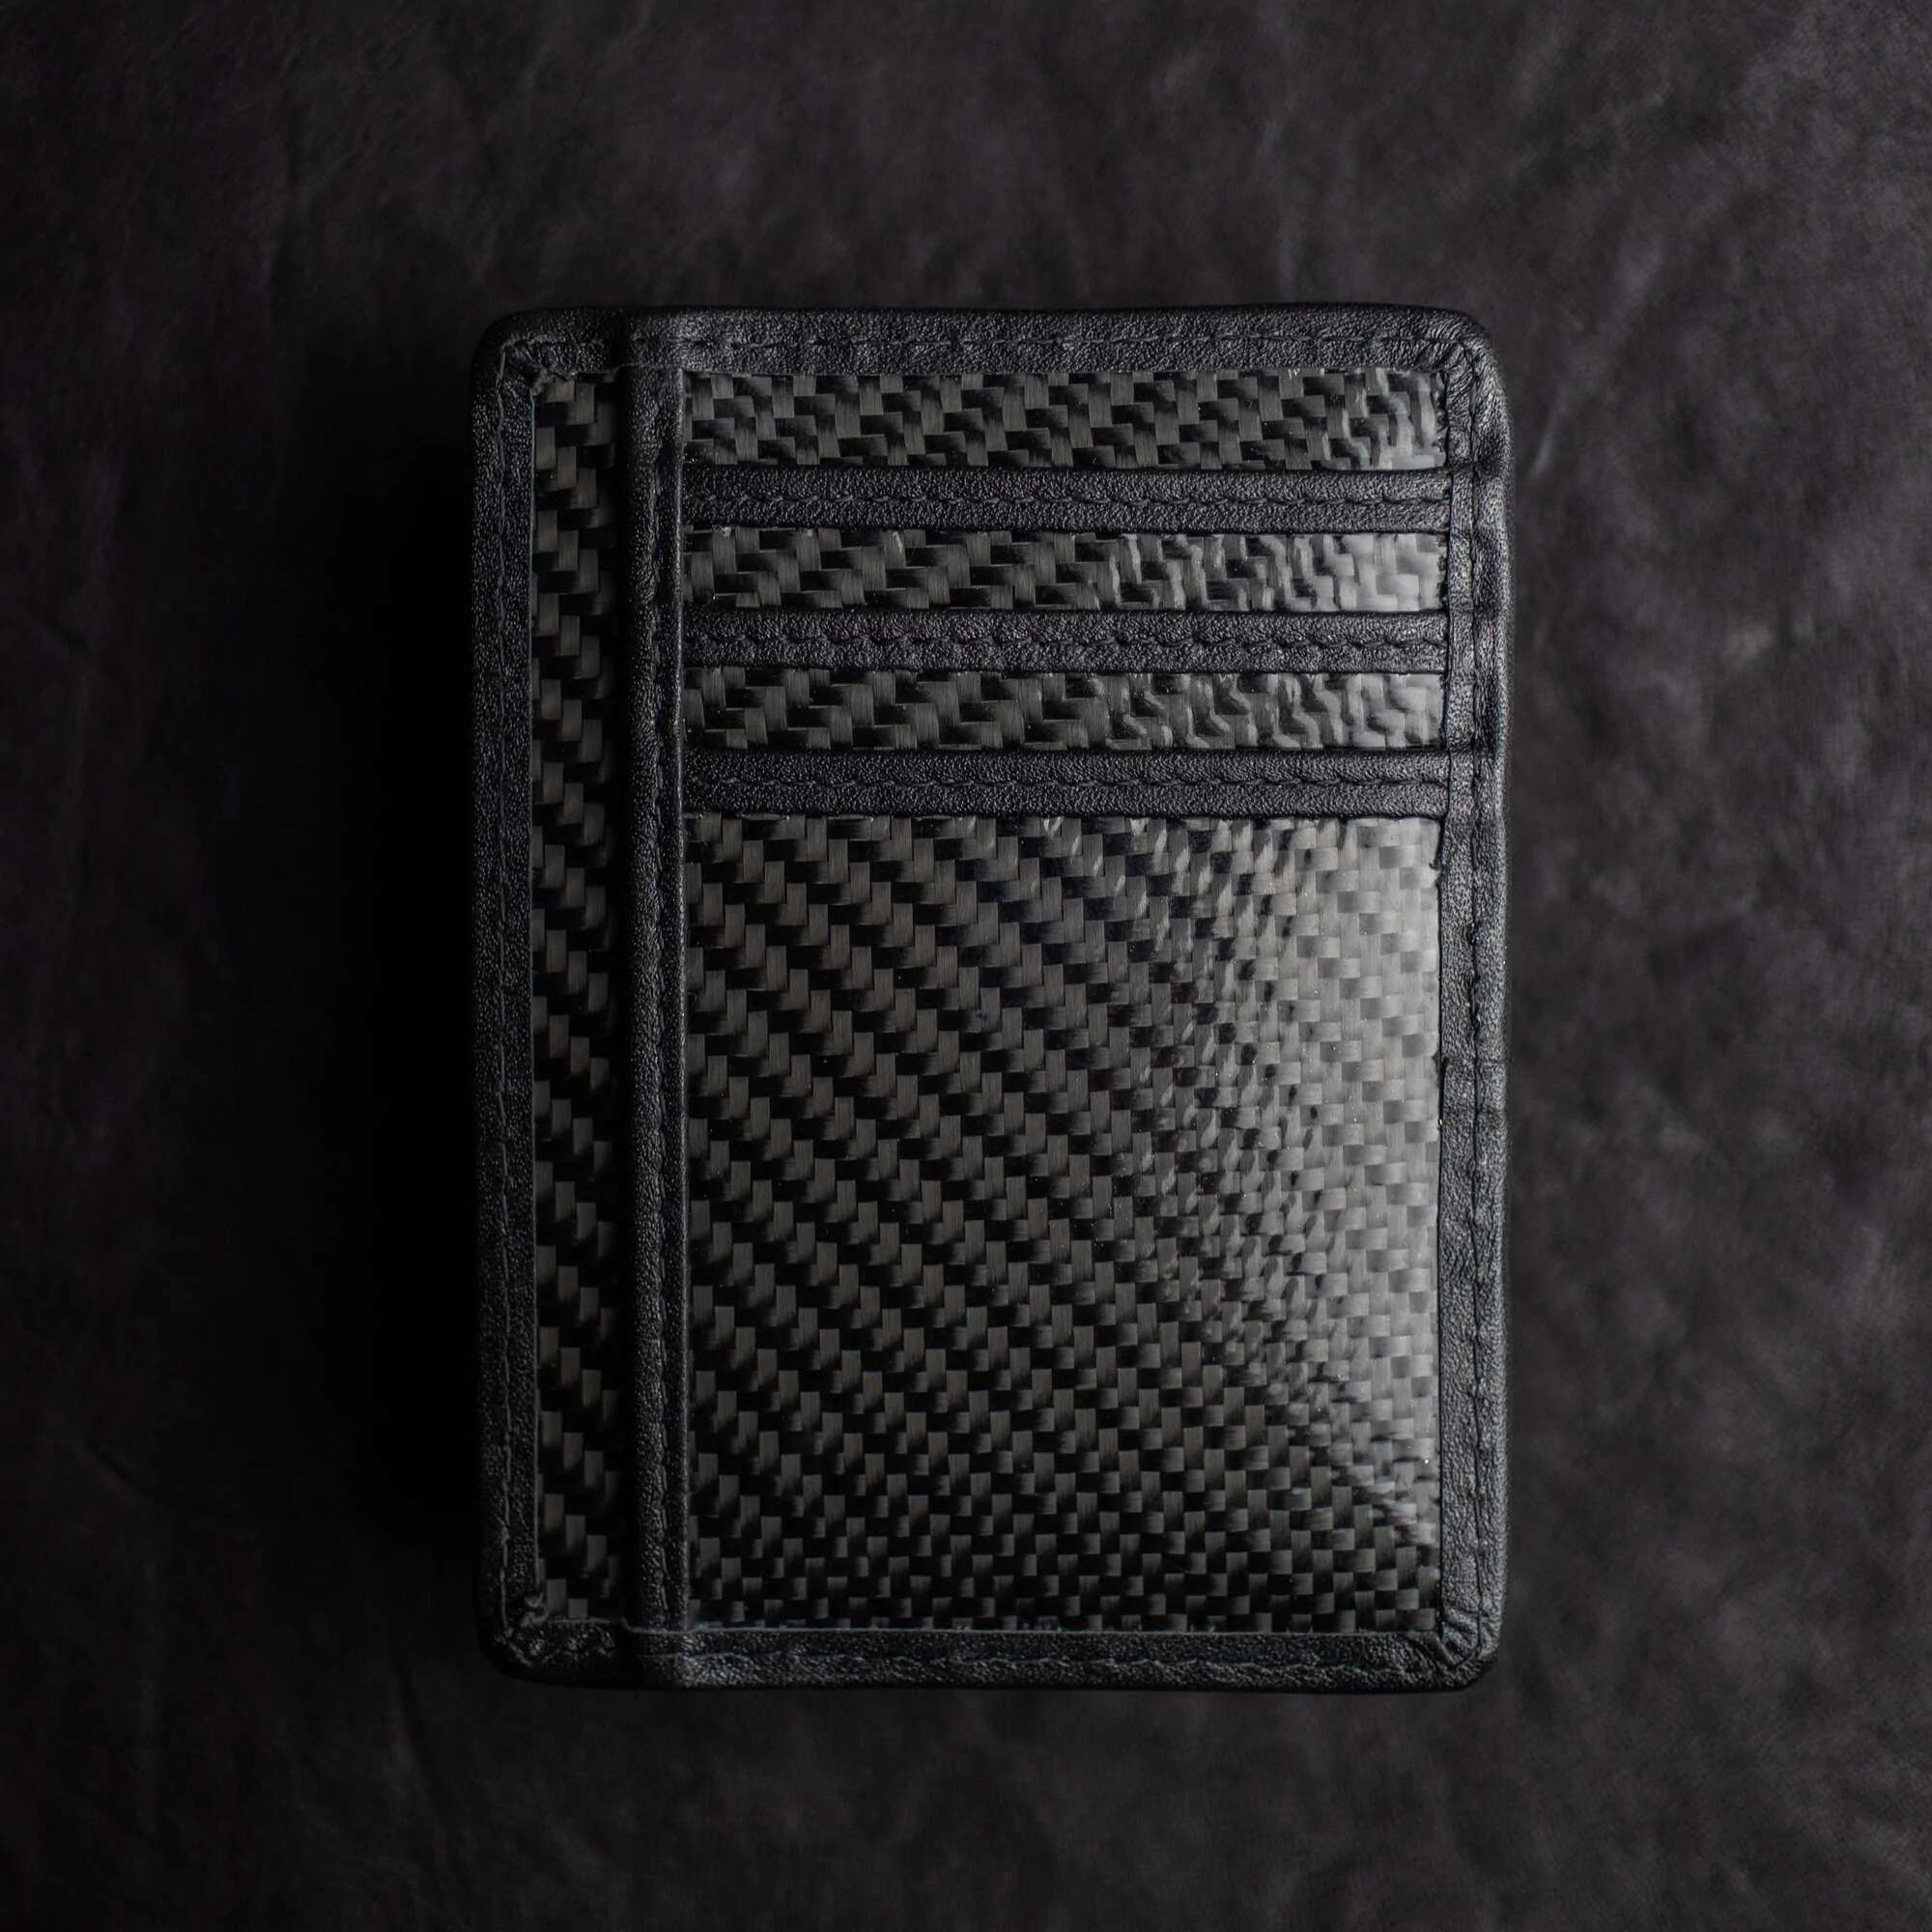 Alternate Version Black Shadow Wallet by Dee Christopher on black surface (back view)